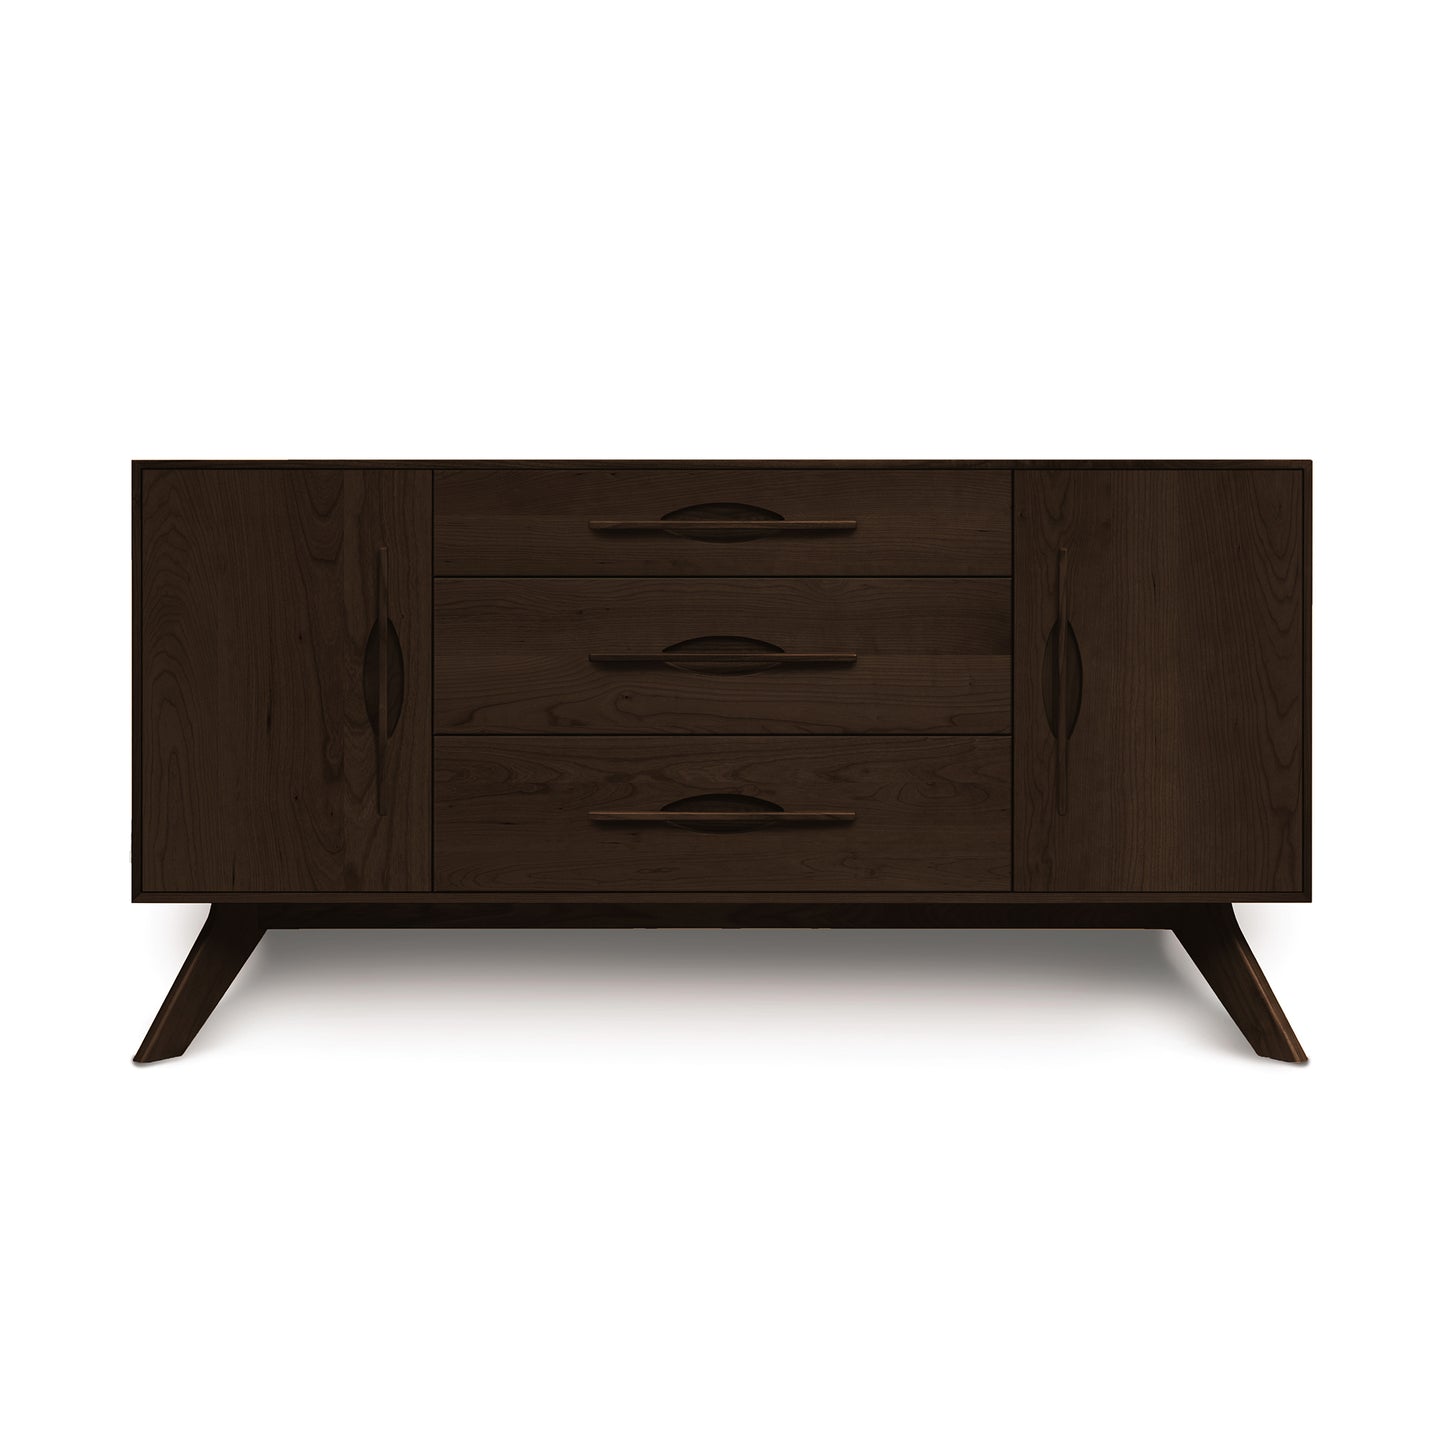 A handmade dark wooden Audrey 2-Door 3-Drawer Buffet by Copeland Furniture, set on angled legs, against a white background.